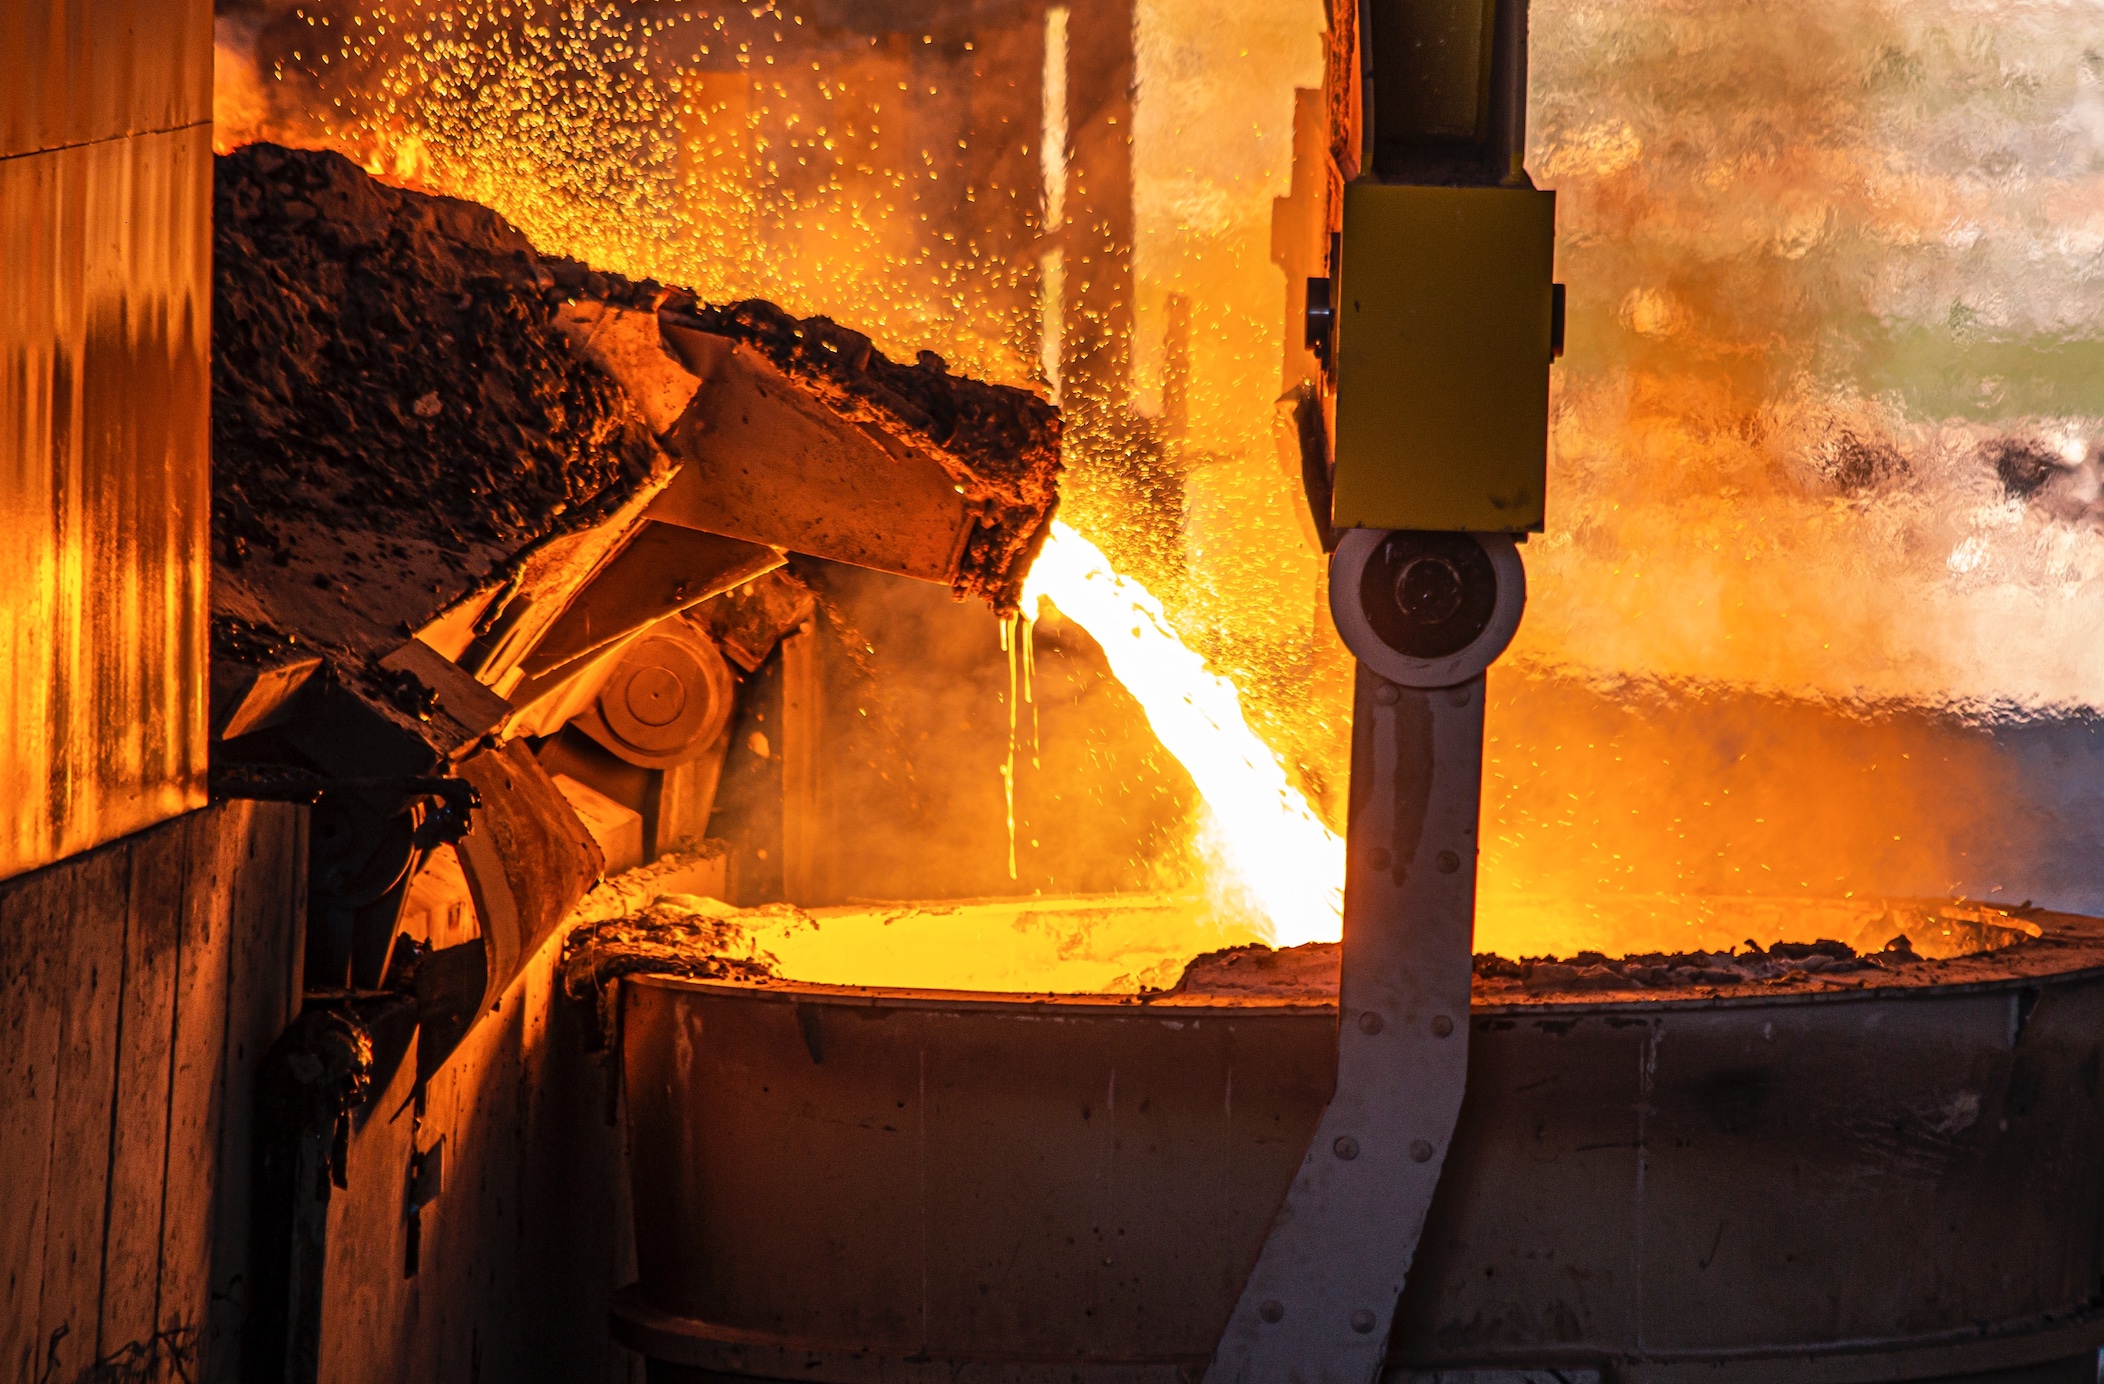 Molten metal being poured at a foundry; image by Yasin Hm, via Unsplash.com.